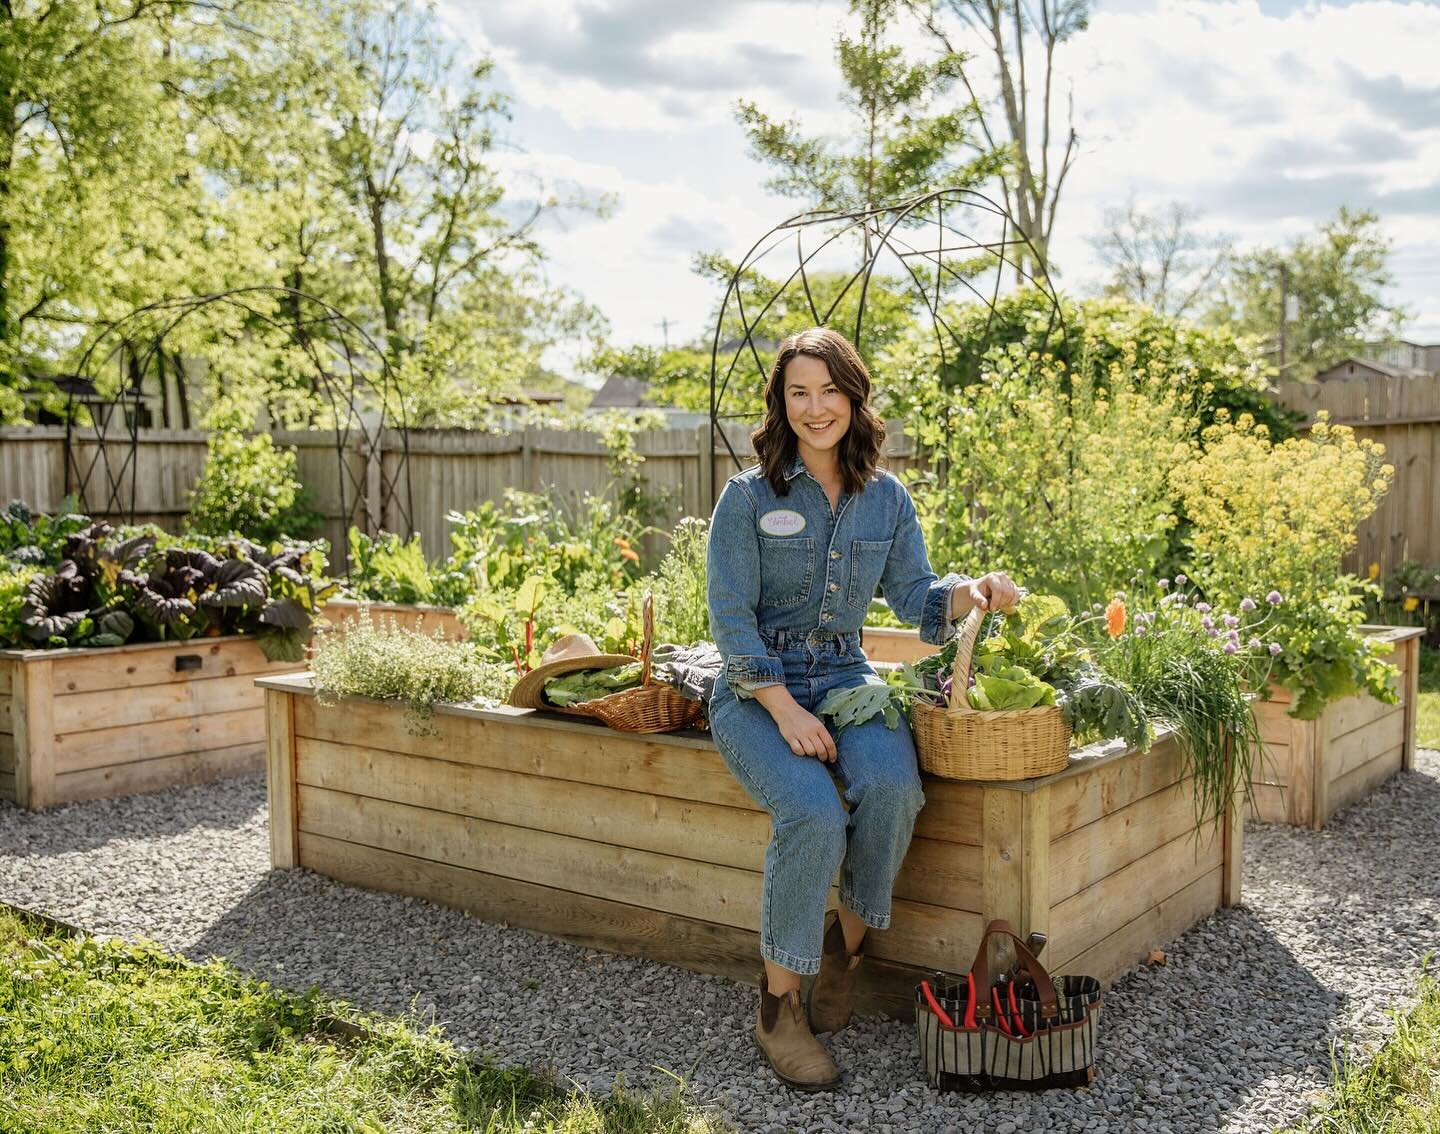 Hi, I&rsquo;m Katie and this is my garden! ⁠
I created my raised bed kitchen garden after learning about the lead-contaminated soil in my neighborhood. My soil had been remediated, but I still didn&rsquo;t feel comfortable planting edible plants in m